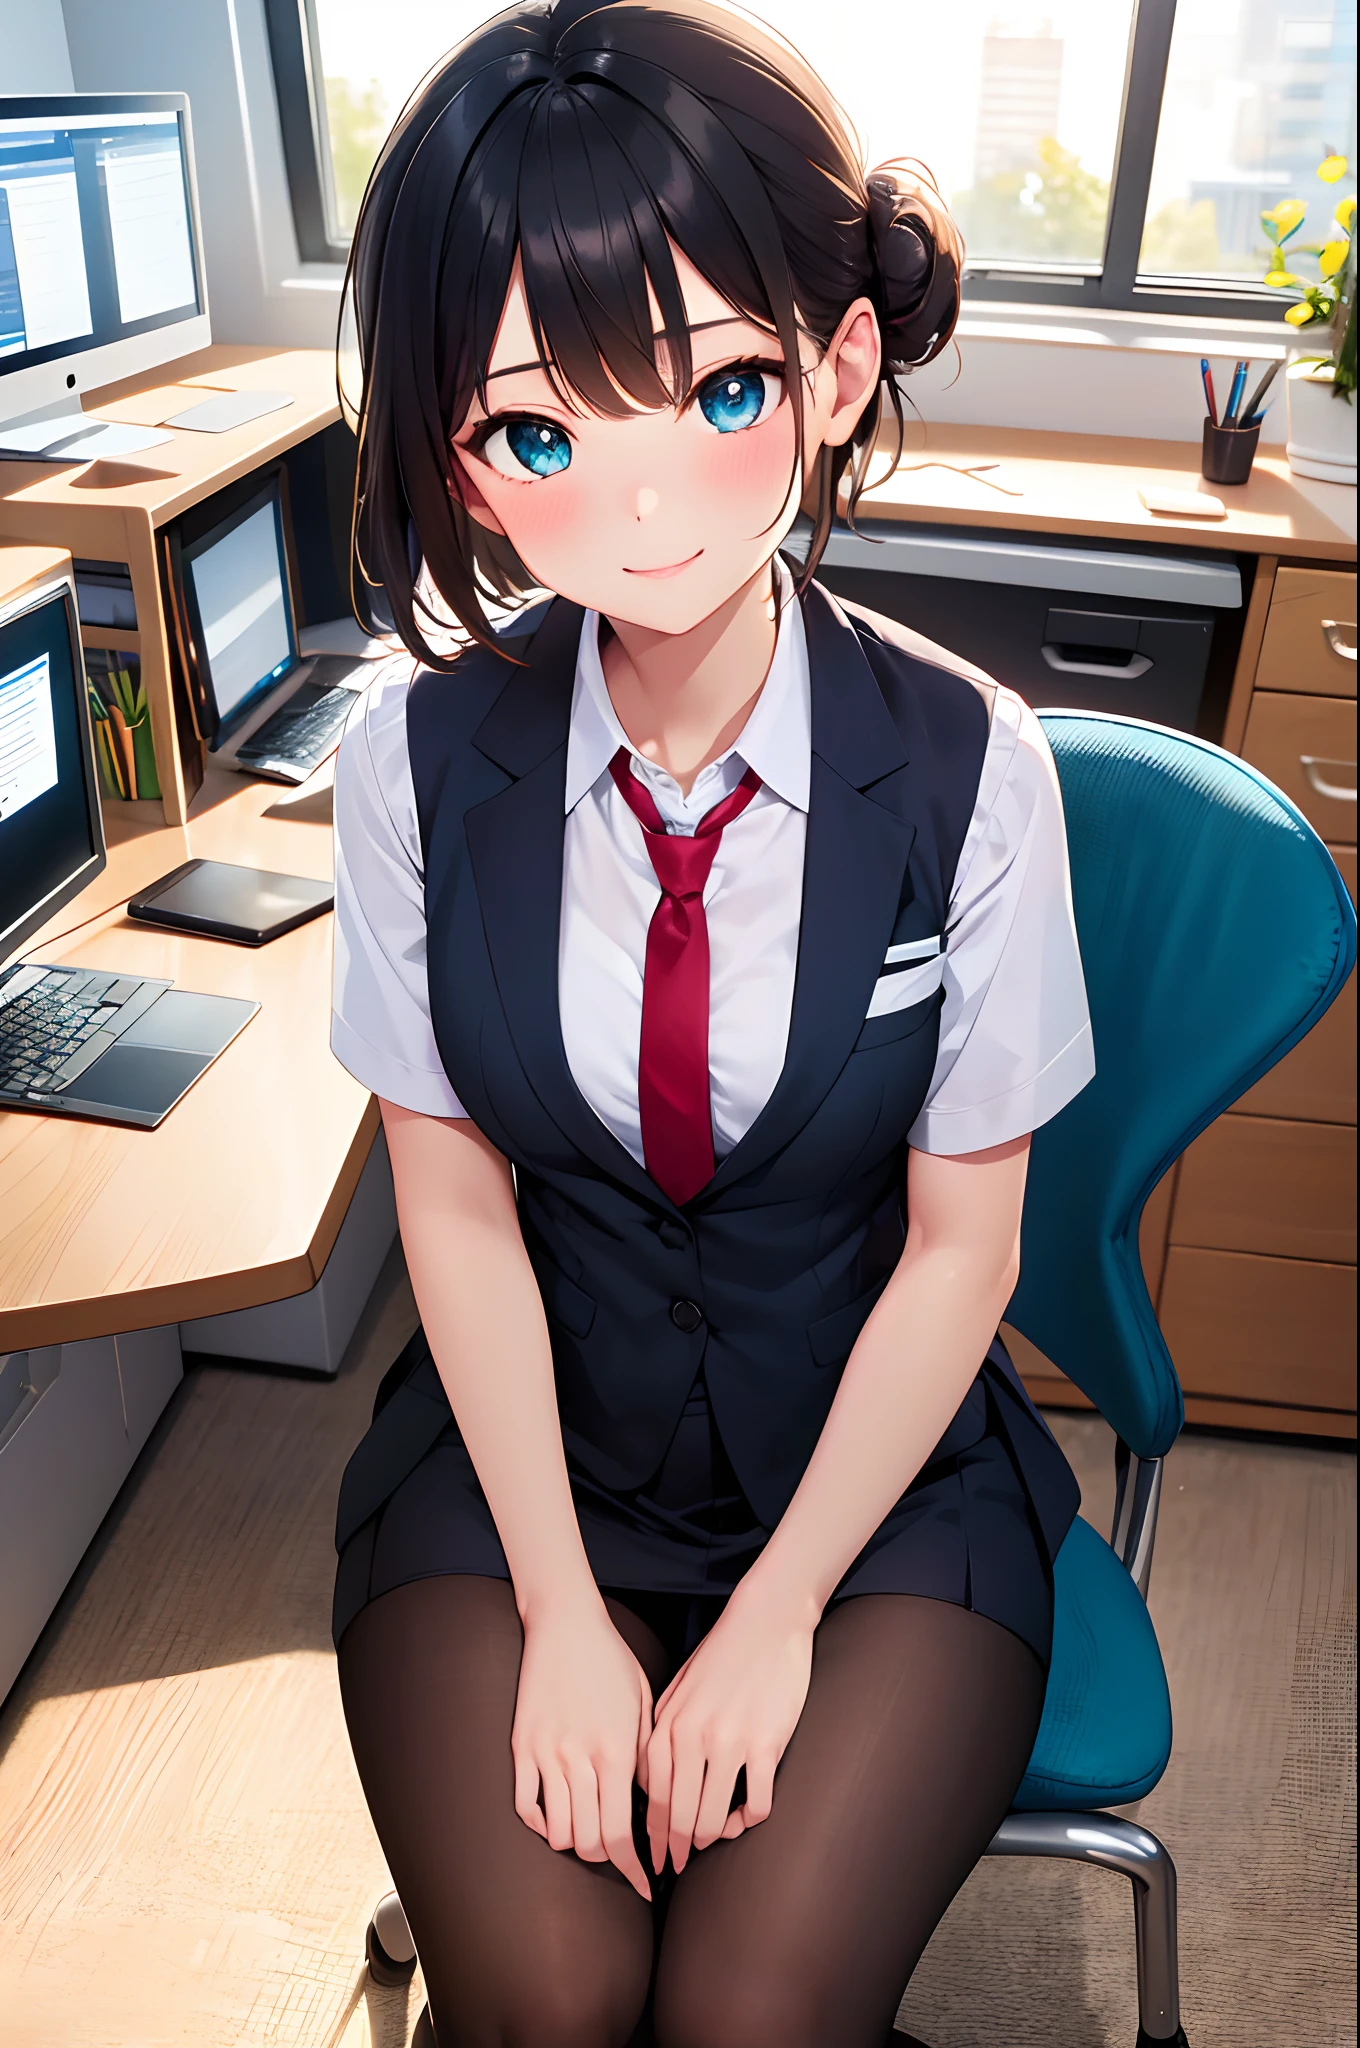 (RAW, best quality, masterpiece:1.5), (photo realistic, intricate details:1.2), ultra highres, absurdres,
1girl, beautiful face, blue eyes, green eyes, detalied eyes, symmetric eyes, light on face, nose blush, short hair, hair bun, black hair tie, 
clk, vest, suit, pencil miniskirt, white shirt, silk scarf, black pantyhose, [:20d, :0.8],
smile, small dimples, sexually suggestive, 
medium breasts, slim waist, slim legs, long legs,
sitting on chair in front of desk, perfect body, good proportions,
looking at viewer, 
(office, indoor, hyper detailed background:1.2), japan, copy machine, file cabinet, computer, monitor,
shiny skin, real skin texture, 
natural lighting, best lighting, detailed background, detailed shadow, sharp focus, depth of field f/2,
saturated, high contrast, strong light and shadow